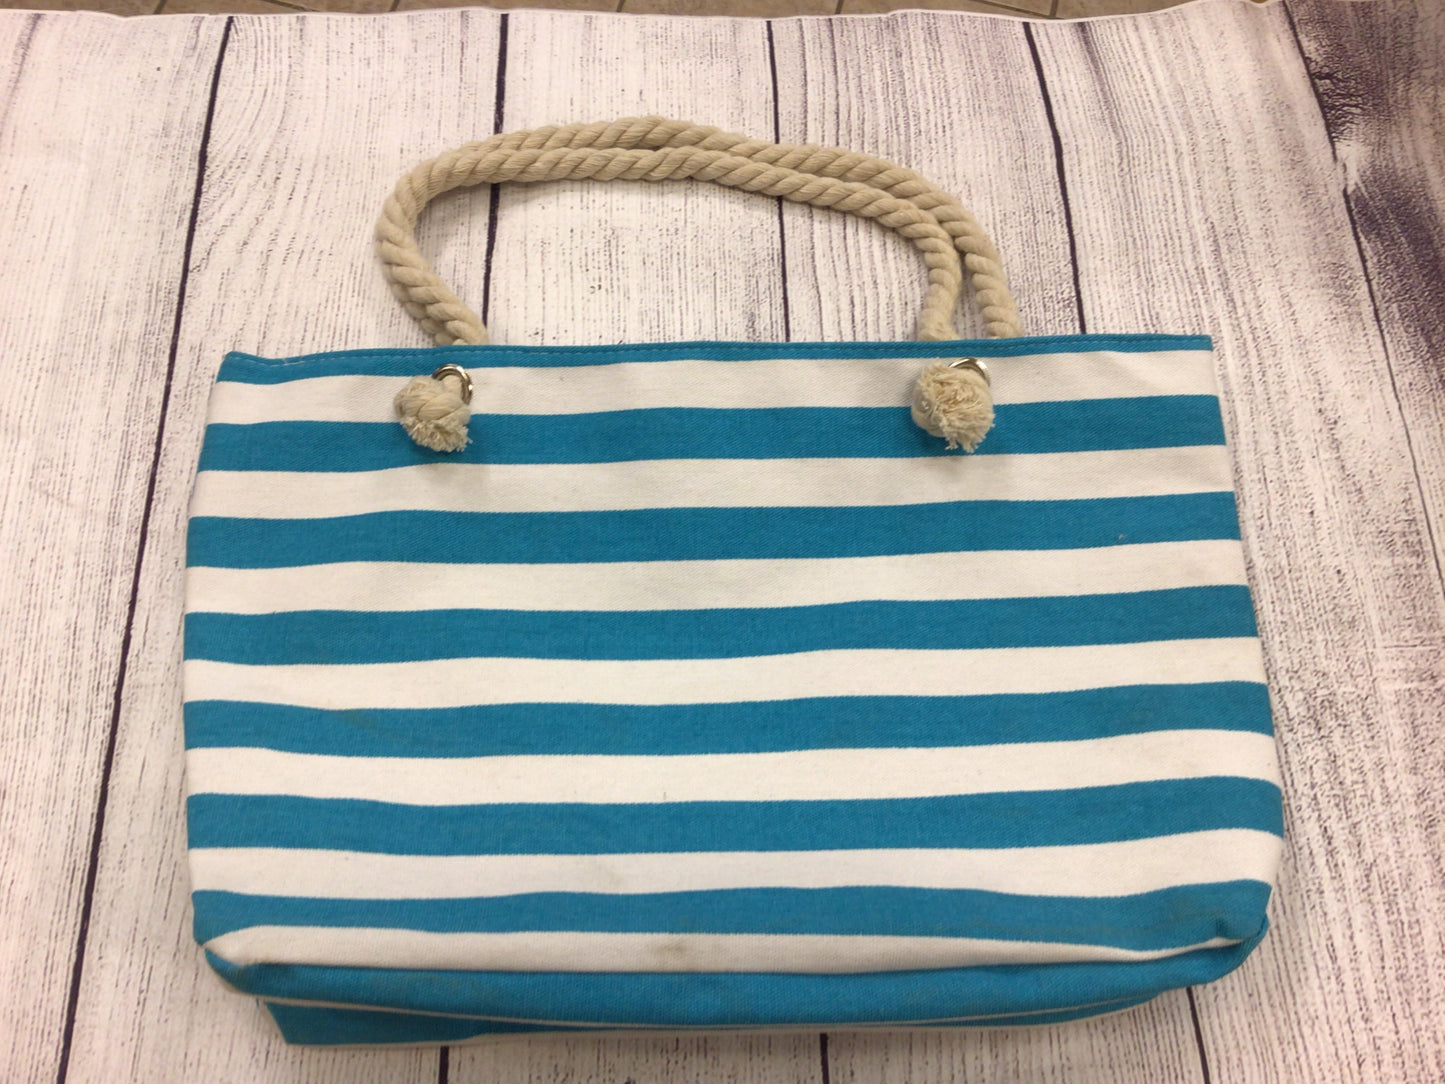 Teal and White Striped Rope Bag